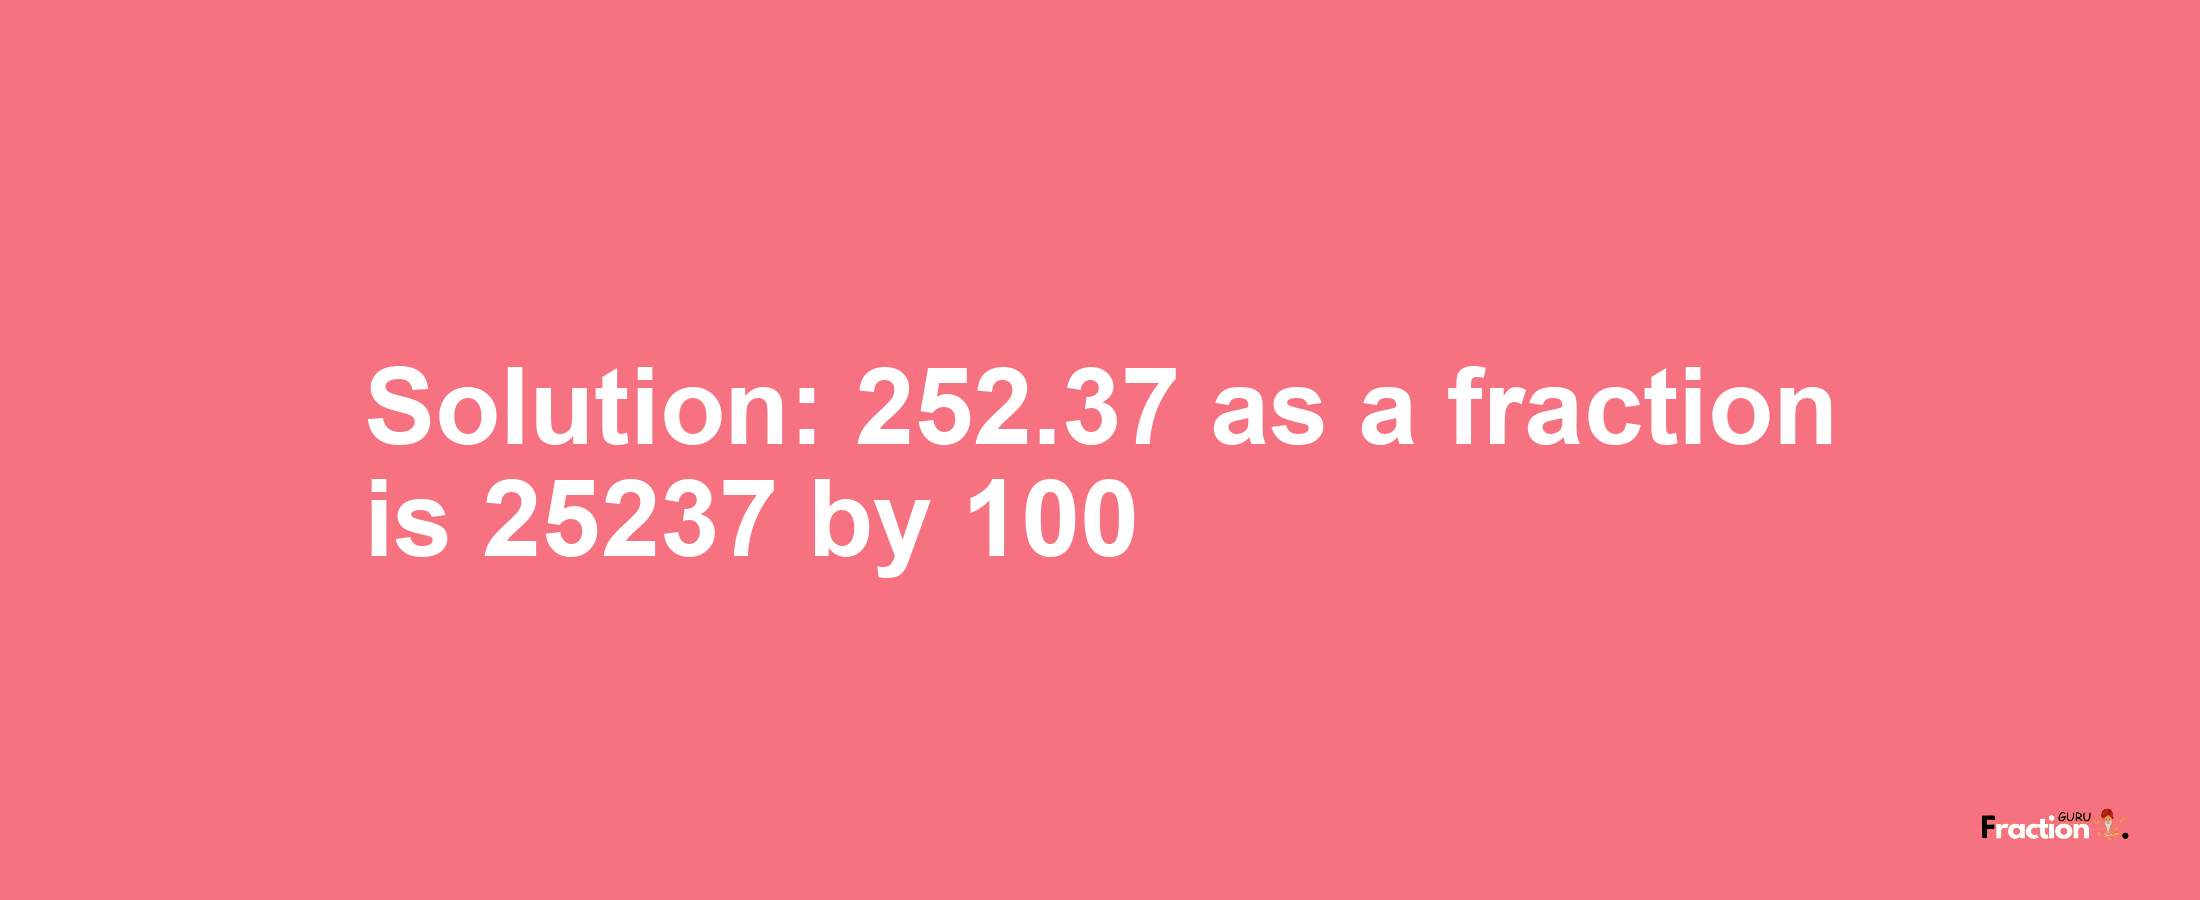 Solution:252.37 as a fraction is 25237/100